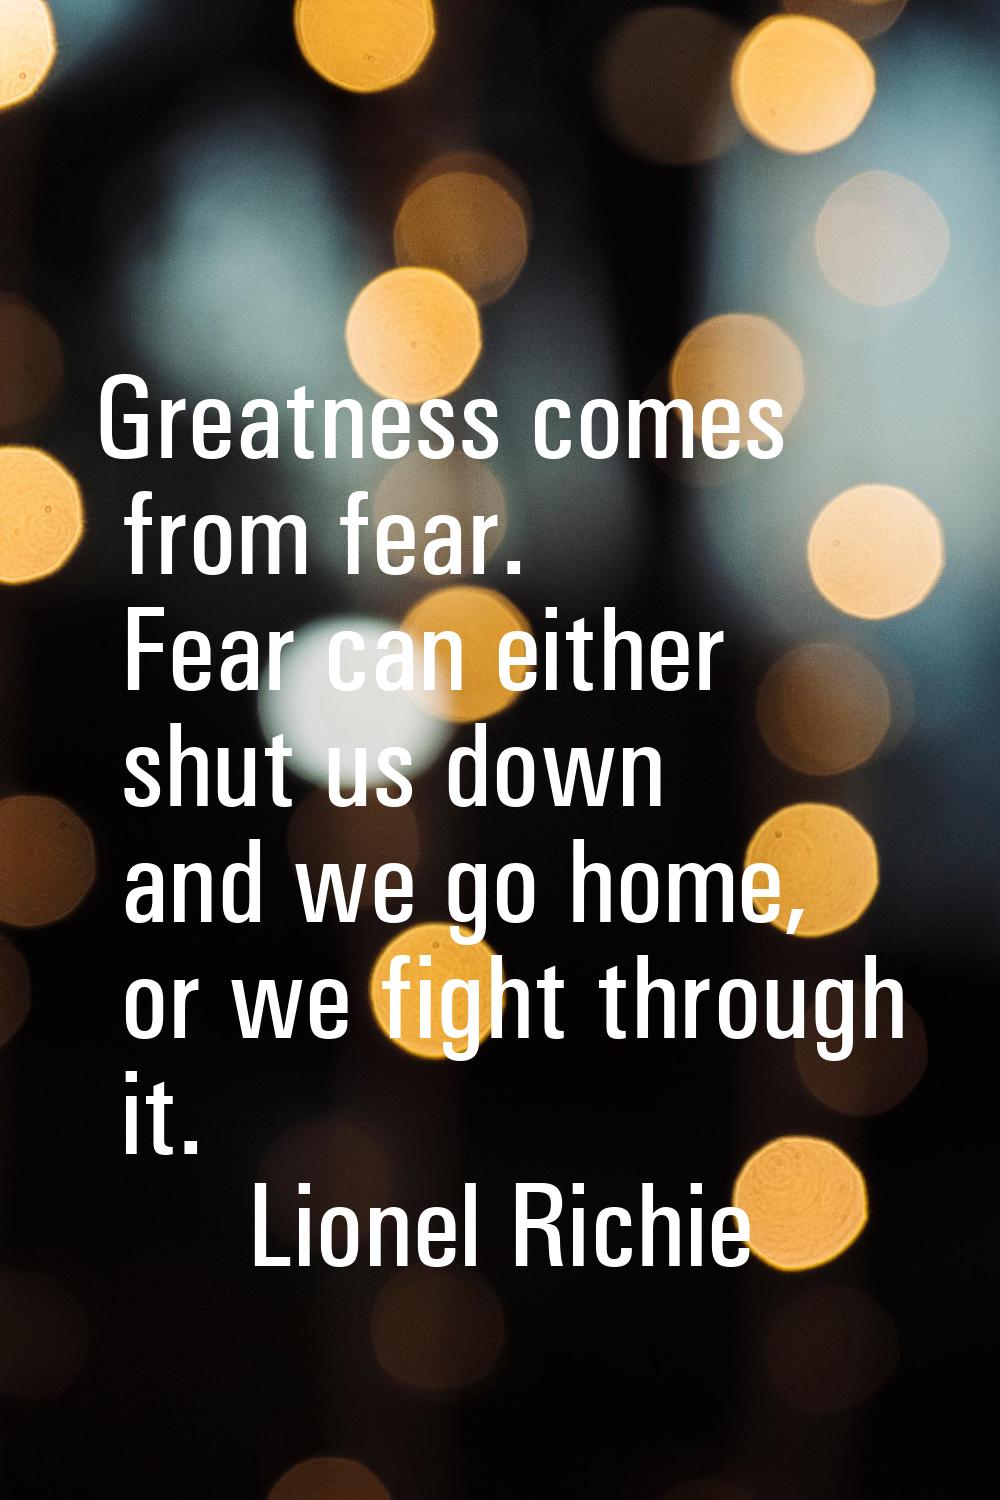 Greatness comes from fear. Fear can either shut us down and we go home, or we fight through it.